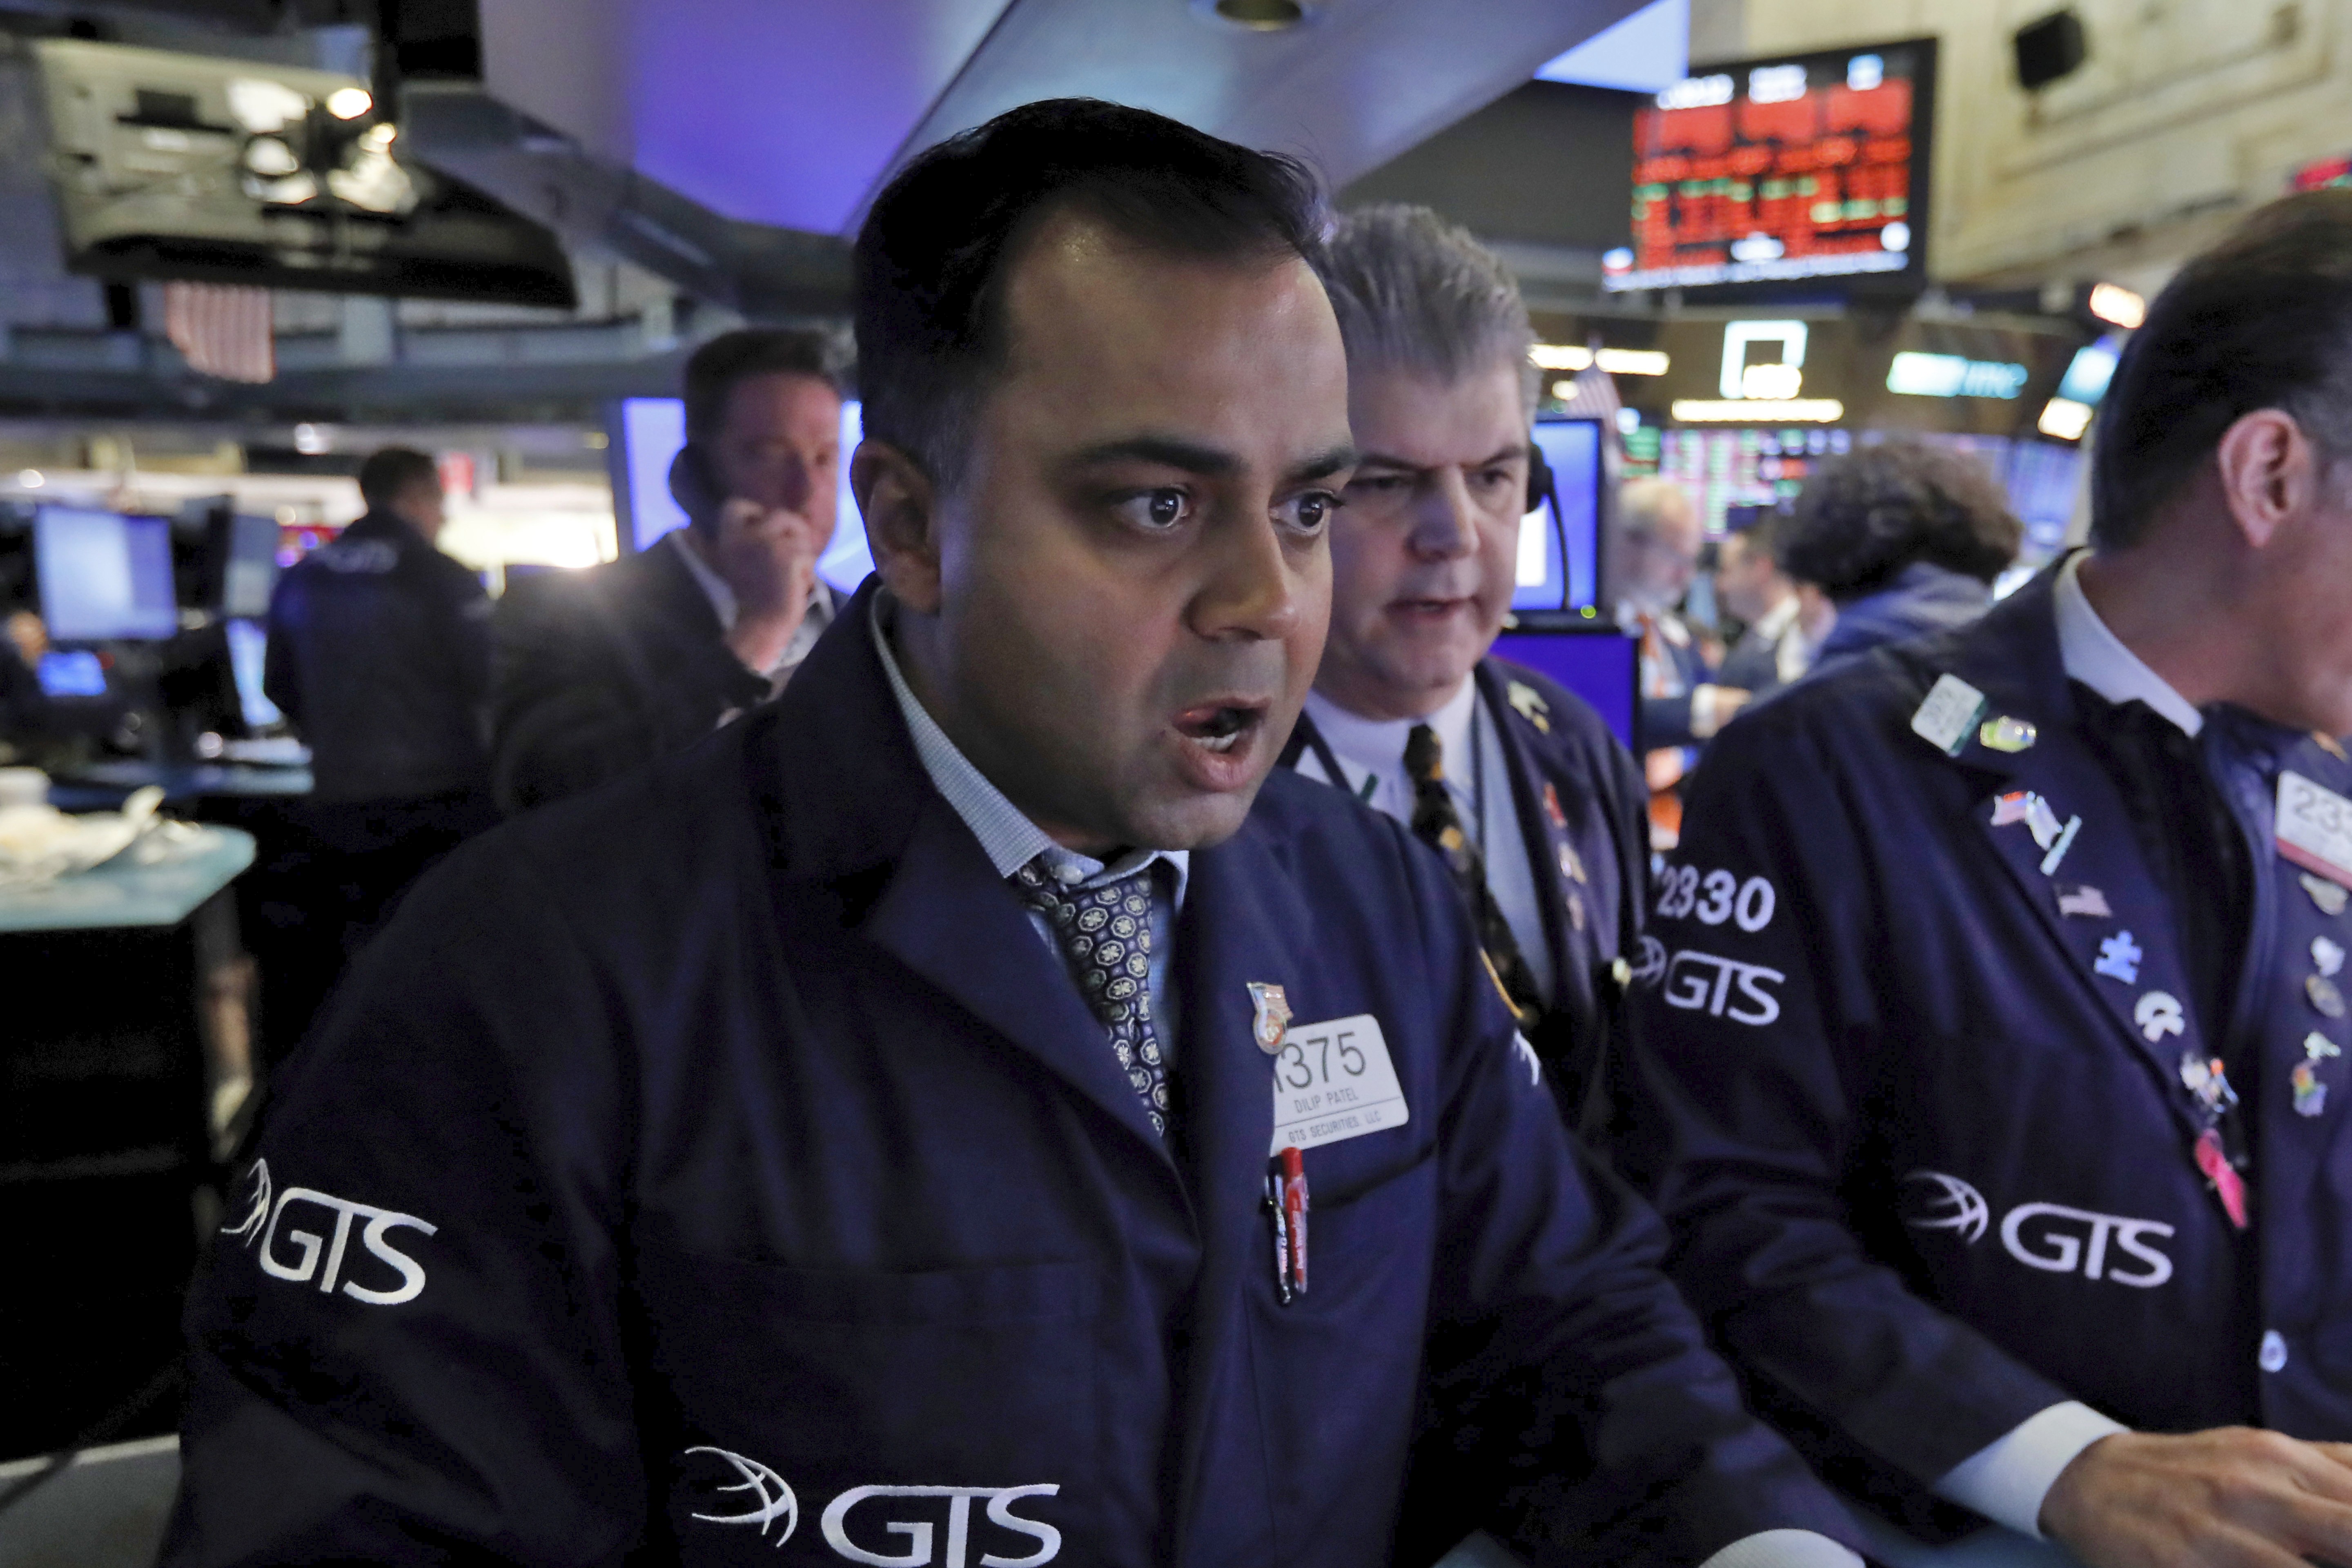 Traders react at the New York Stock Exchange on March 9. The Dow Jones Industrial Average sank 7.8 per cent, its steepest drop since the financial crisis of 2008, as a decline in oil prices and worsening fears about the fallout of the global spread of the coronavirus seized markets. Photo: AP